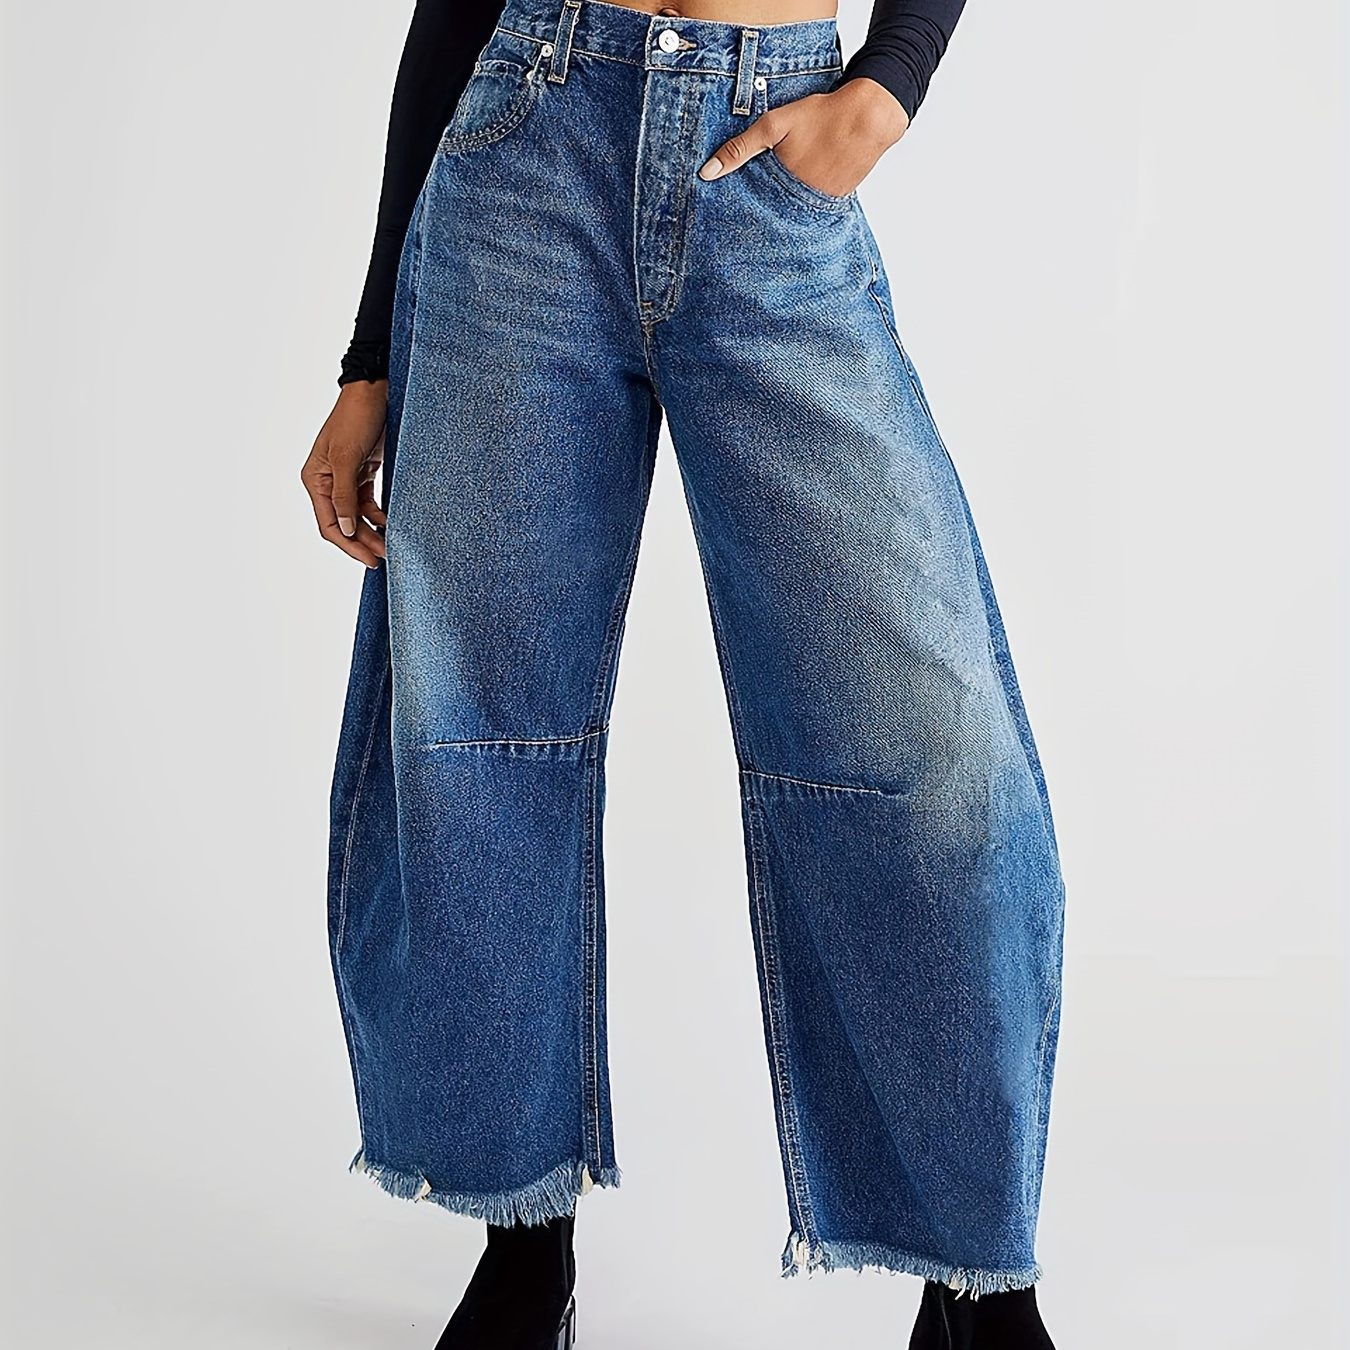 

Women's High-waisted Wide Leg Horseshoe Jeans, Casual Frayed Hem Denim Pants, Loose Fit Fashion Trousers, Streetwear Essentials For Fall & Winter